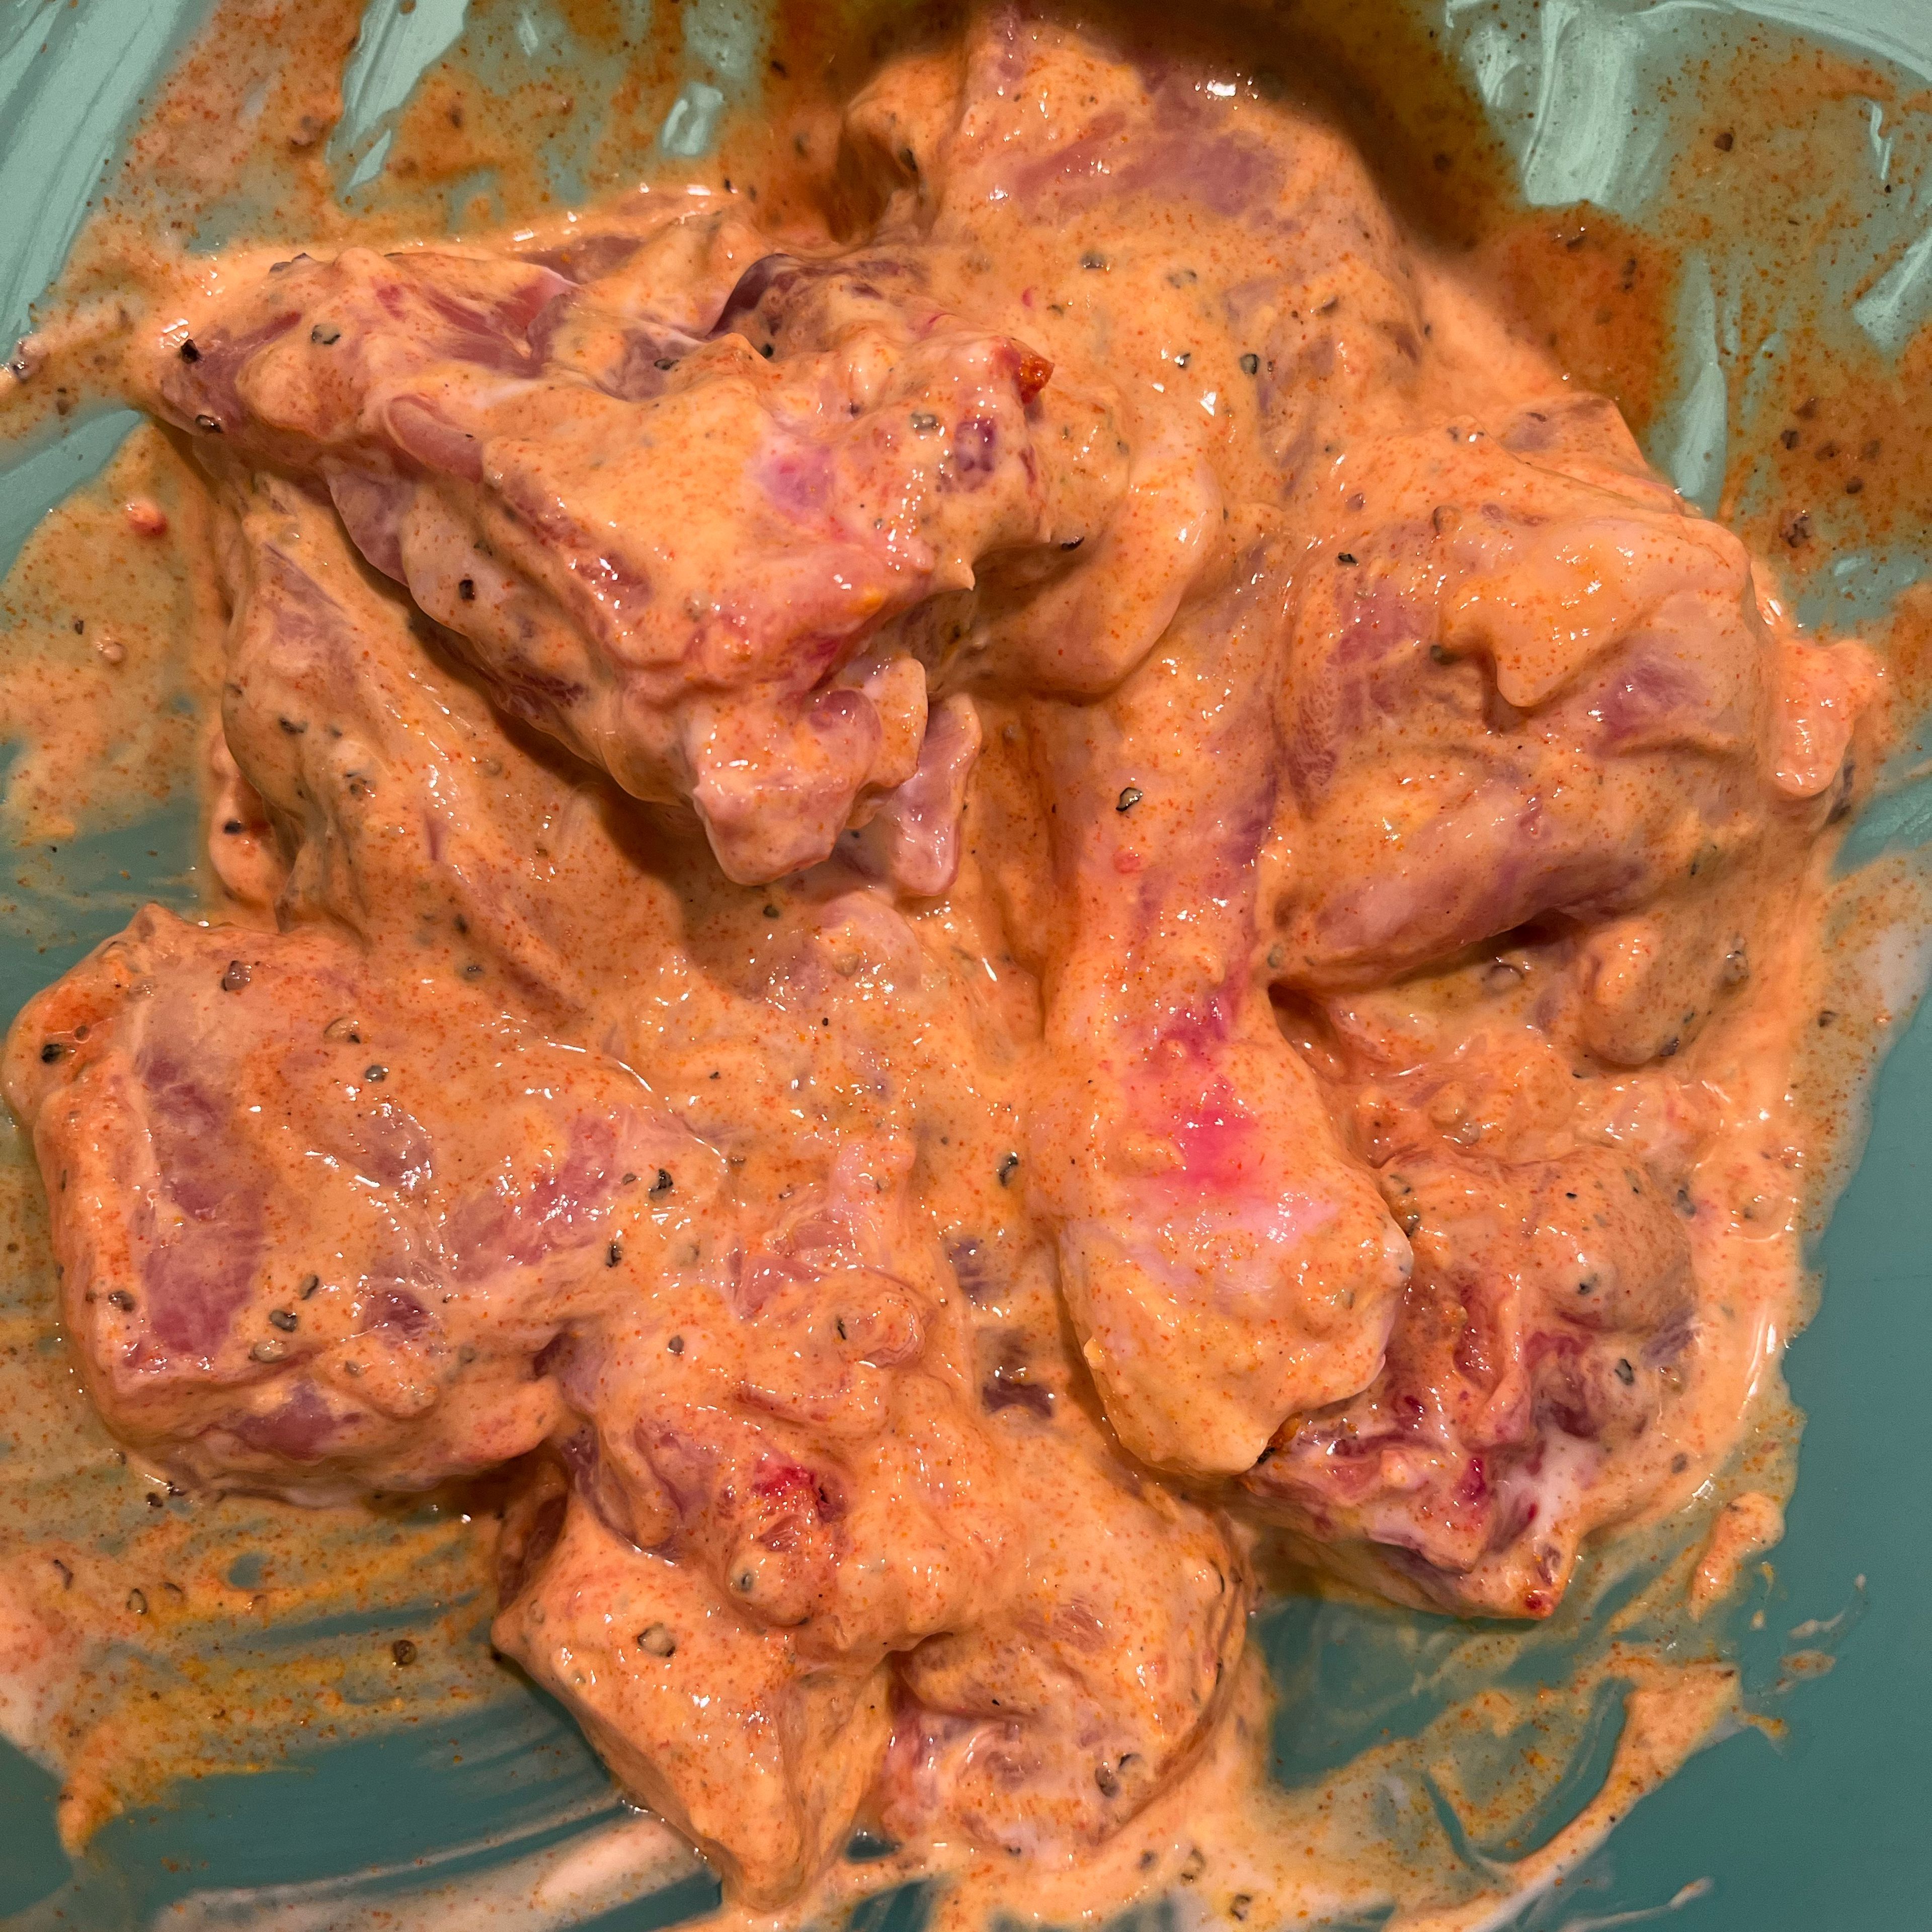 Cut chicken into pieces and marinate with curd, black pepper, turmeric, cayenne pepper and salt for 30min.